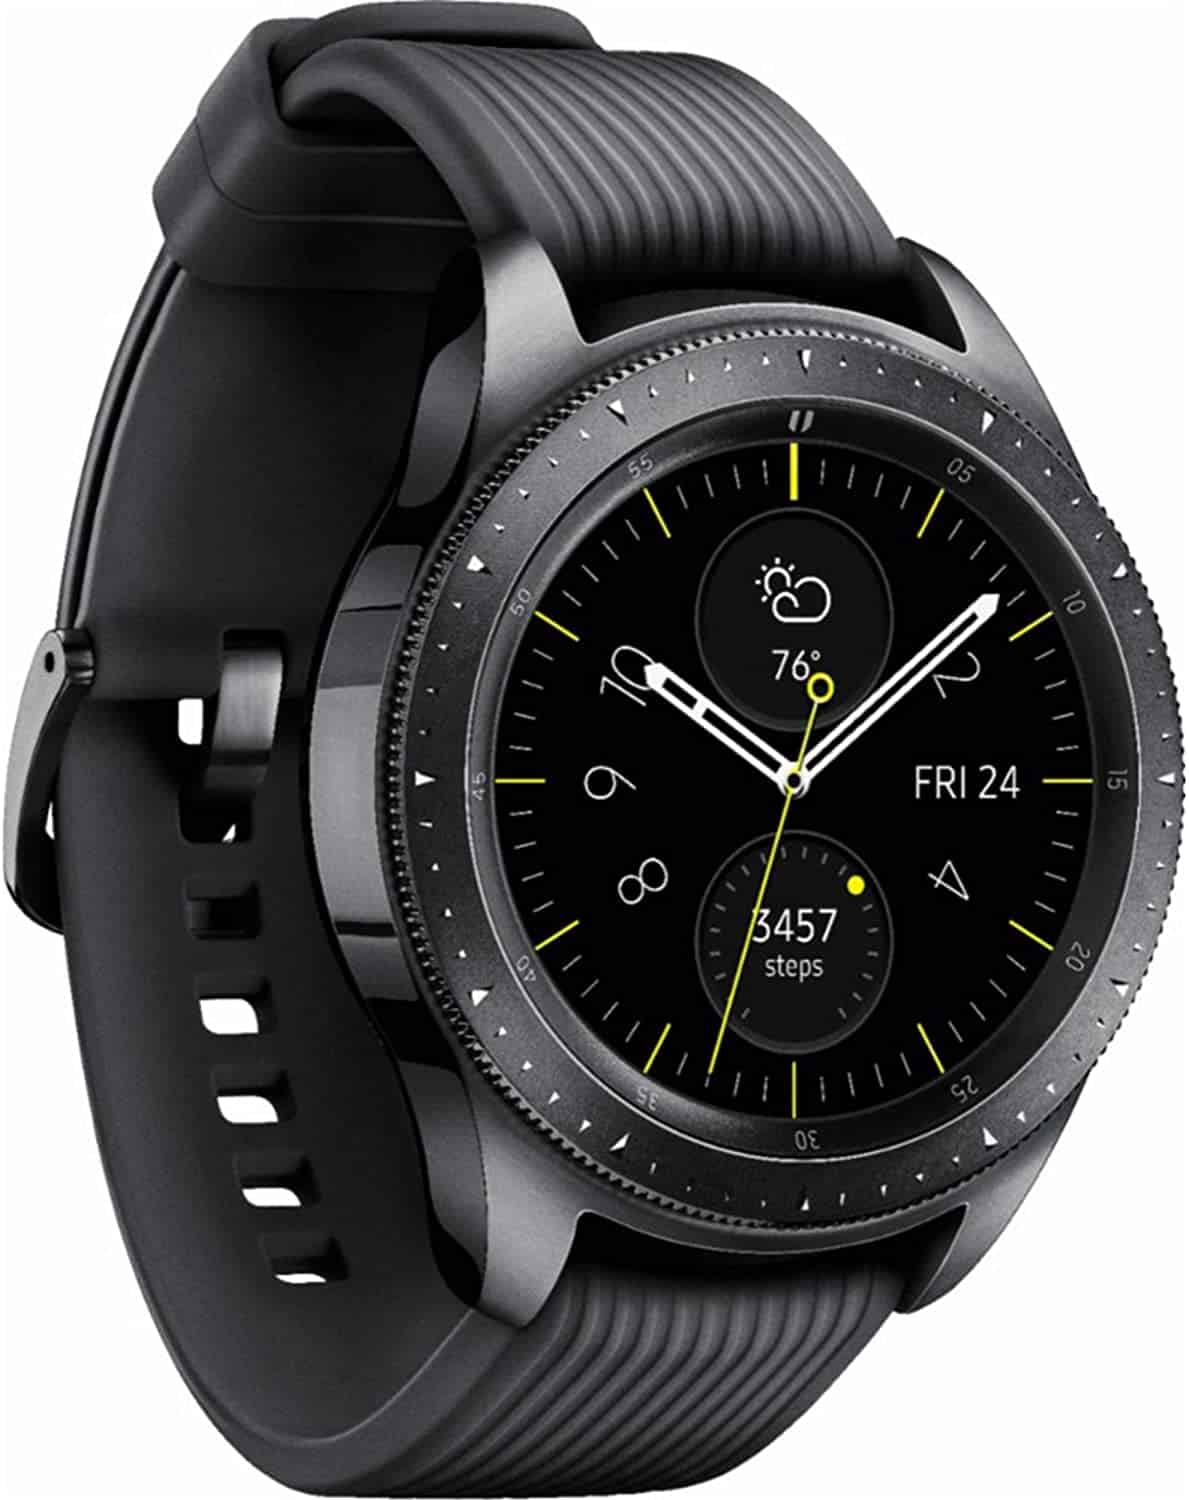 Best Smartwatches With Heart Rate Sensor